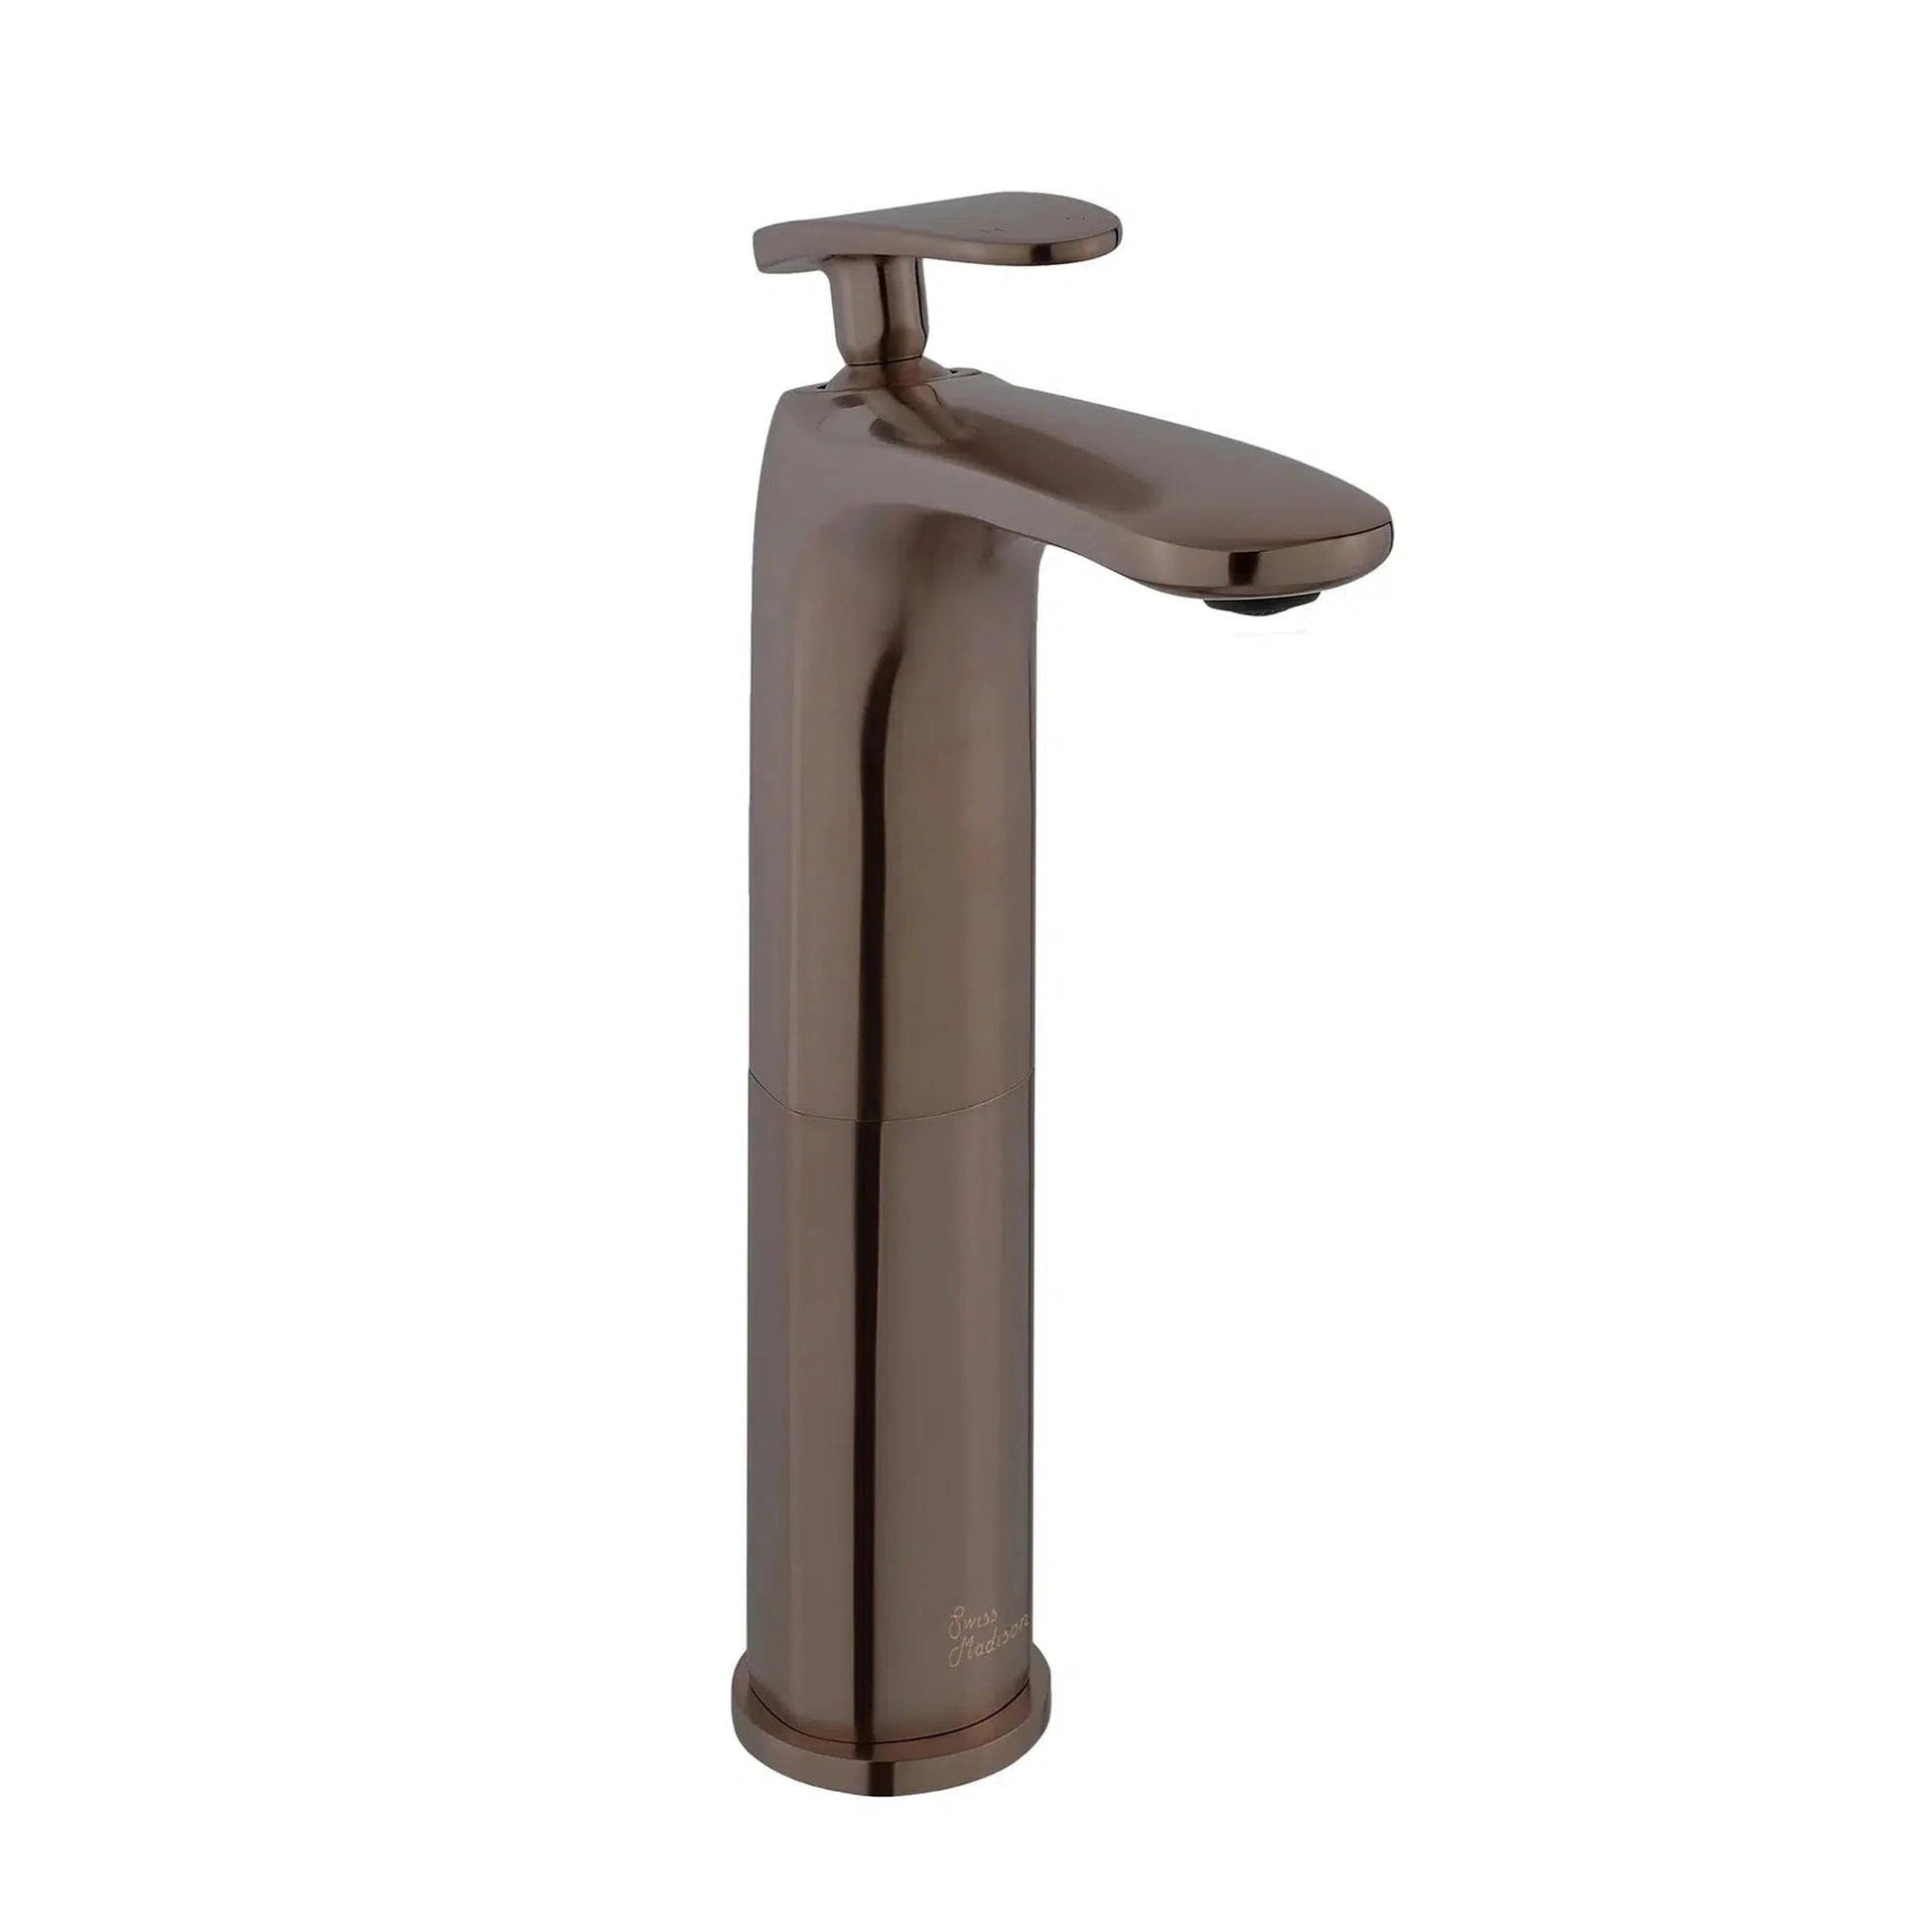 Swiss Madison Sublime 11" Oil Rubbed Bronze Single Hole Bathroom Faucet With Flow Rate of 1.2 GPM